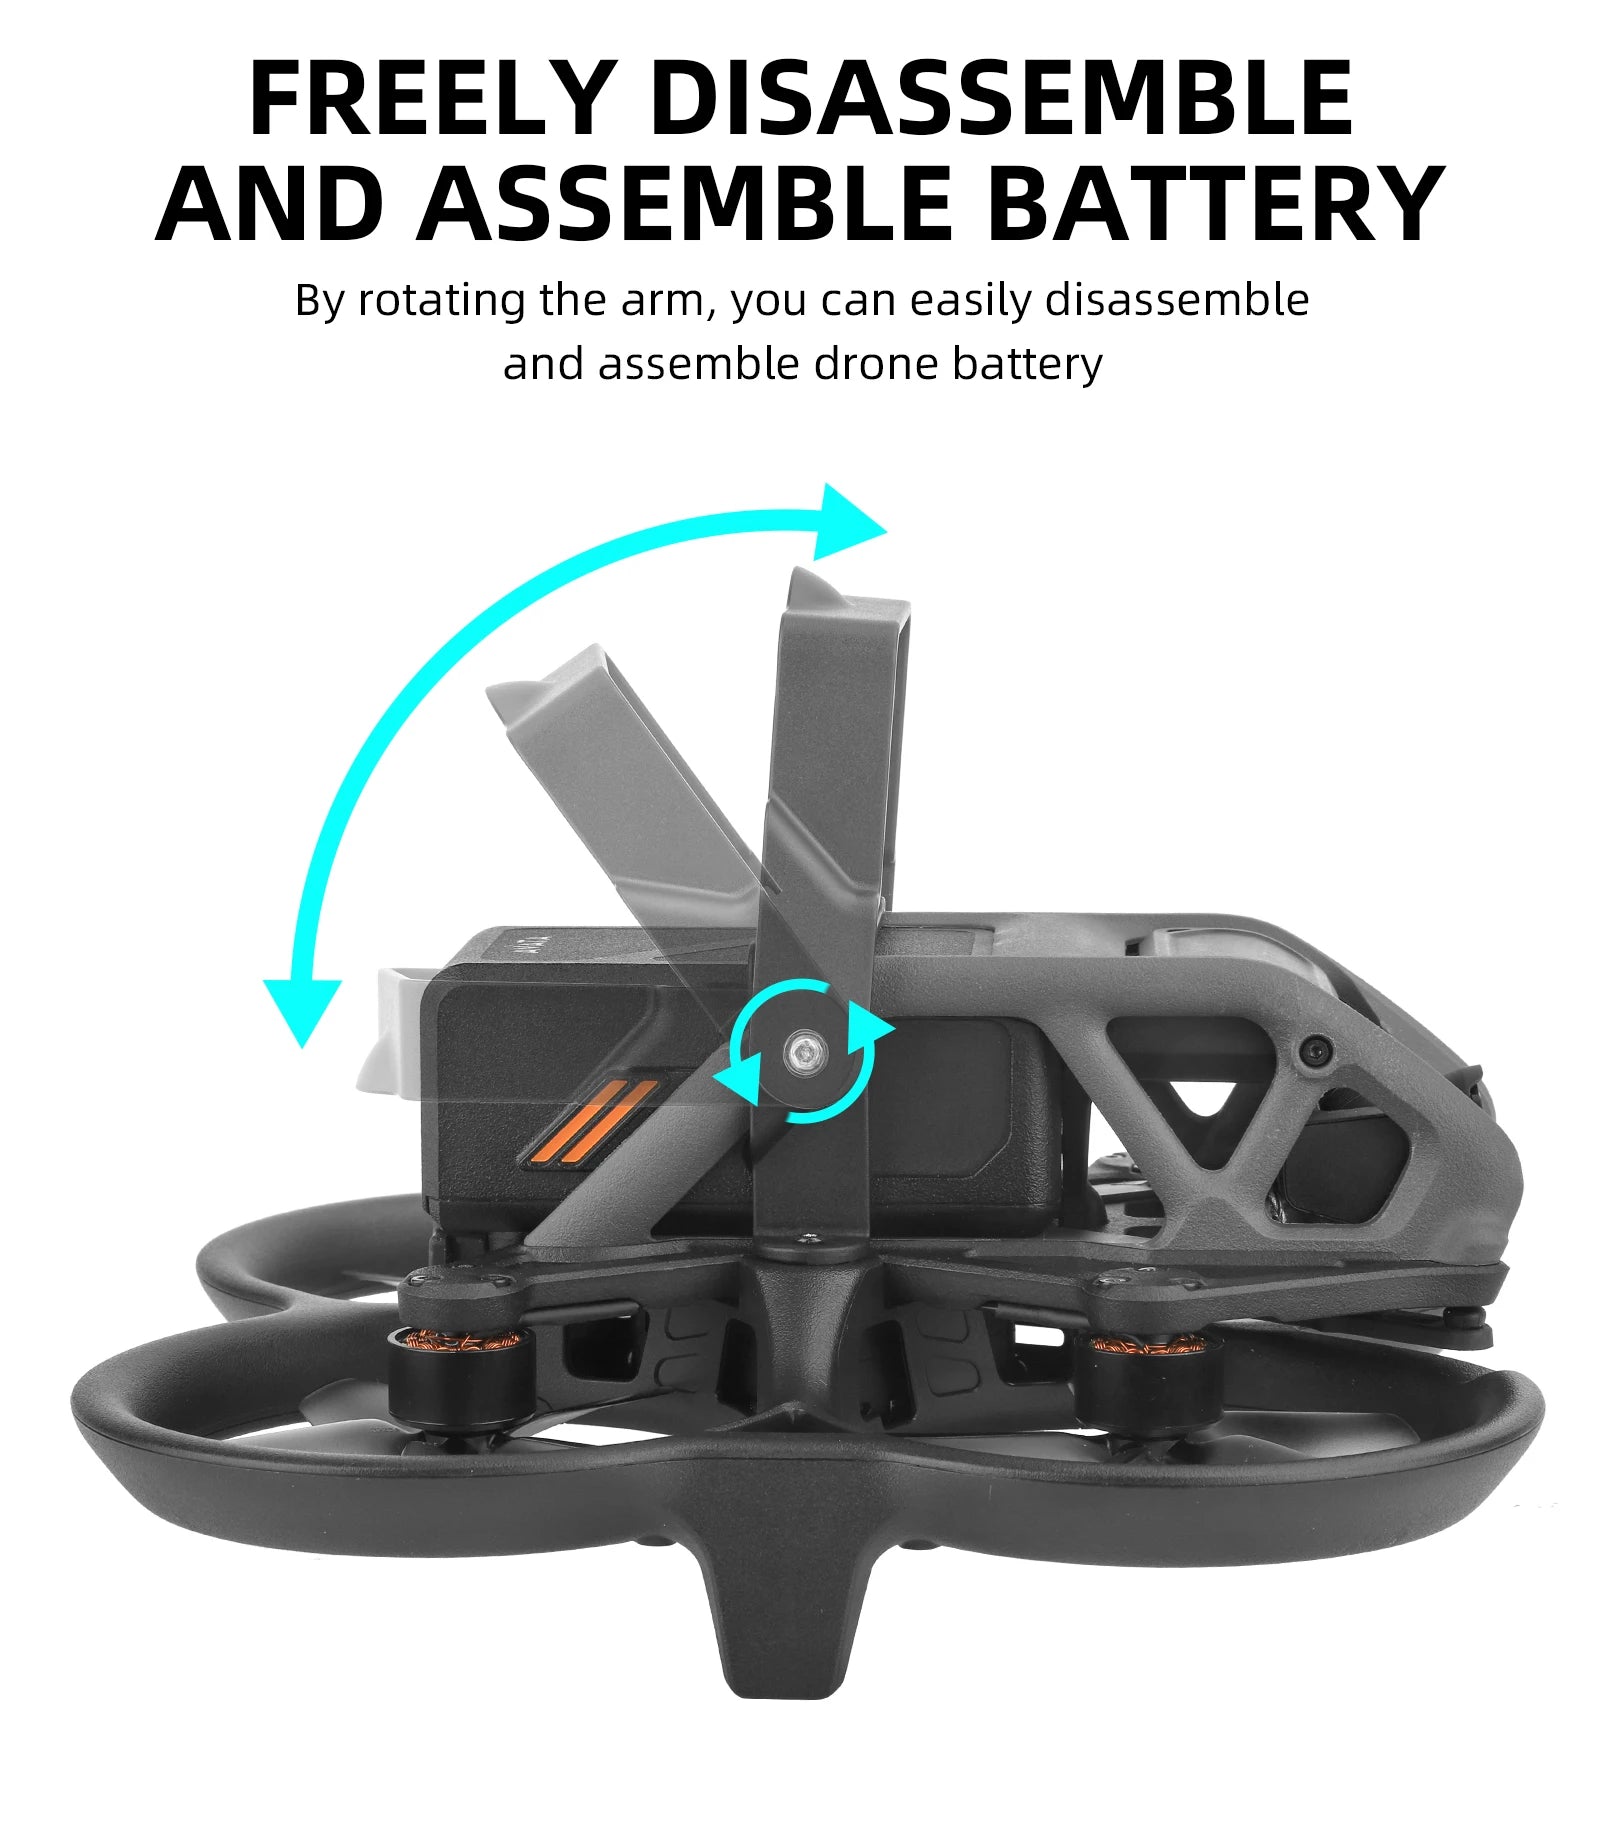 Battery Anti-release Buckle, drone battery 5 is easy to disassemble and assemble . by rotating the arm, you